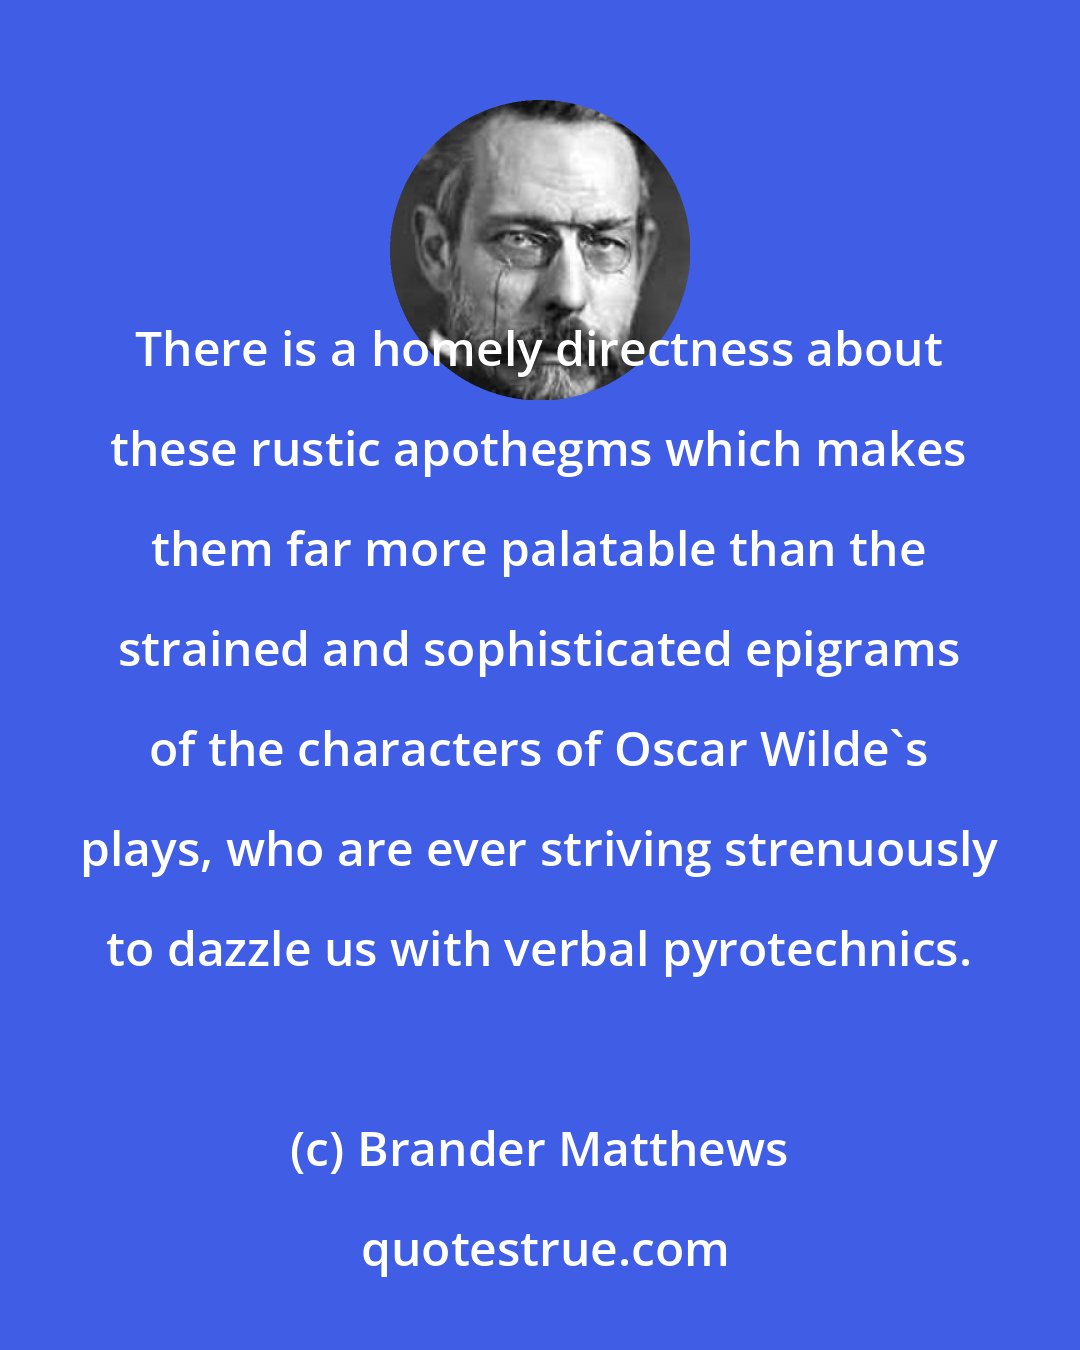 Brander Matthews: There is a homely directness about these rustic apothegms which makes them far more palatable than the strained and sophisticated epigrams of the characters of Oscar Wilde's plays, who are ever striving strenuously to dazzle us with verbal pyrotechnics.